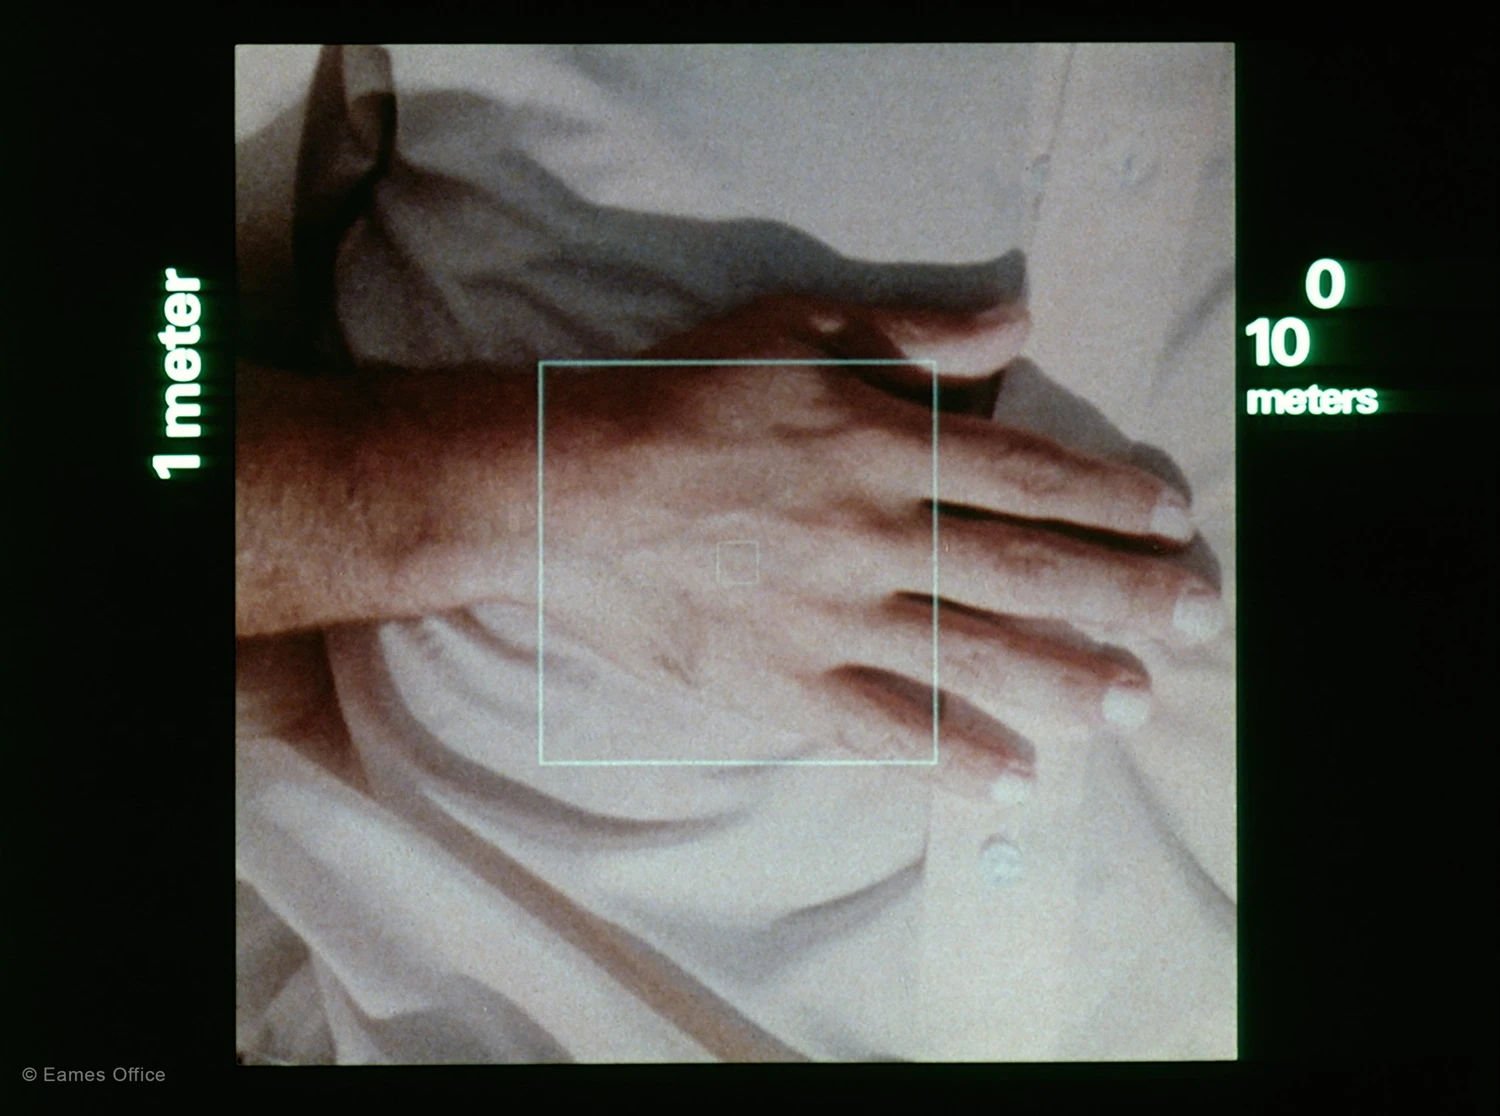 Still from <i>Powers of Ten and the Relative Size of Things in the Universe</i>, 1977, written and directed by Charles and Ray Eames. © 1977 Eames Office LLC.-圖片